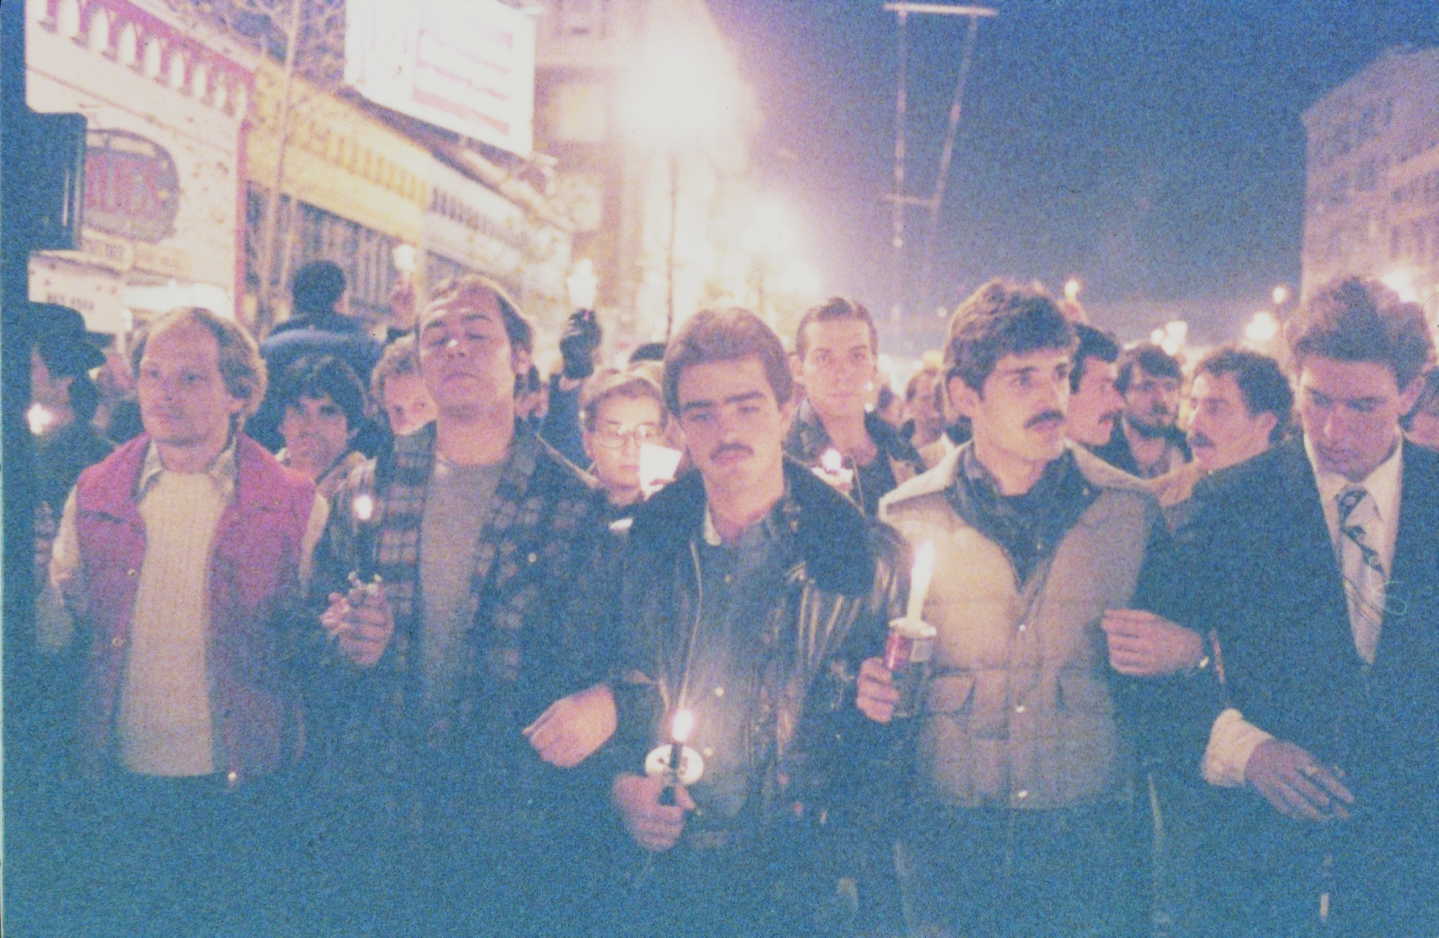  Candlelight March, 1980; photograph by Crawford Barton, Crawford Wayne Barton Collection (1993-11), GLBT Historical Society. 